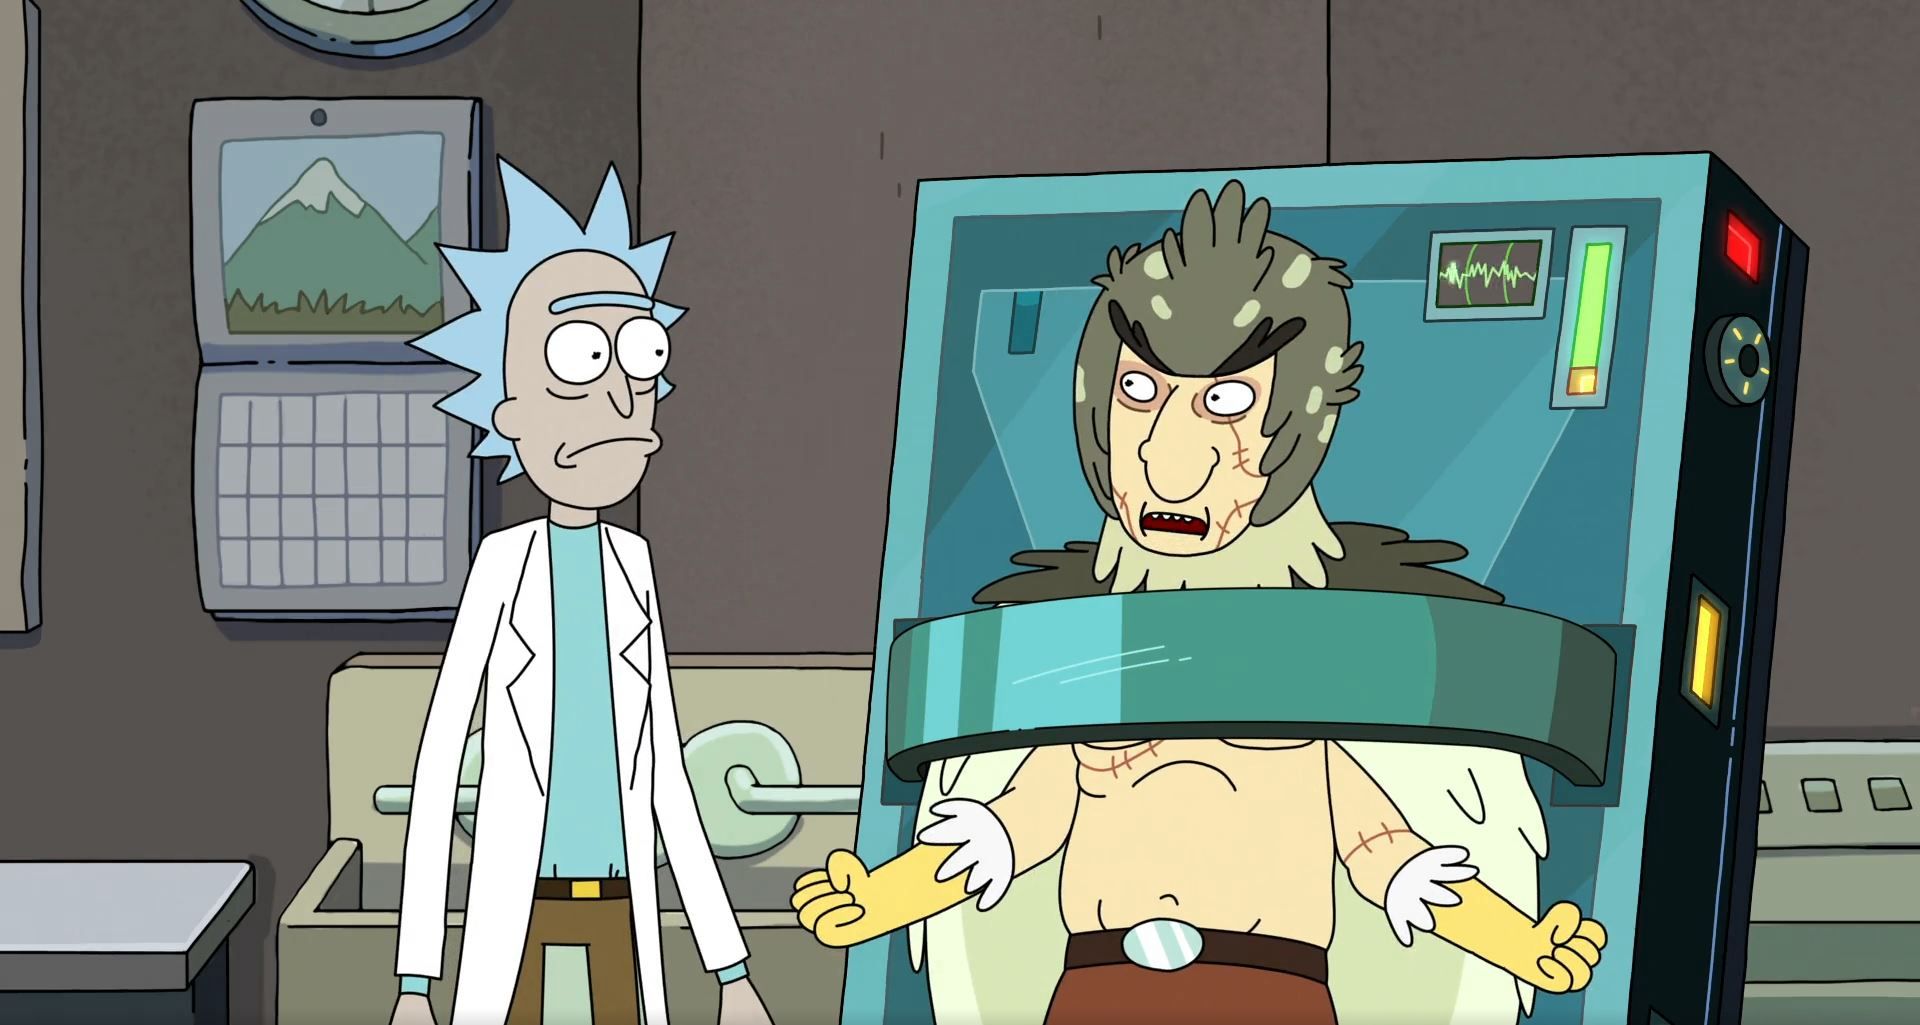 rick-and-morty-rick-and-jerry-season-5-episode-8-birdperson